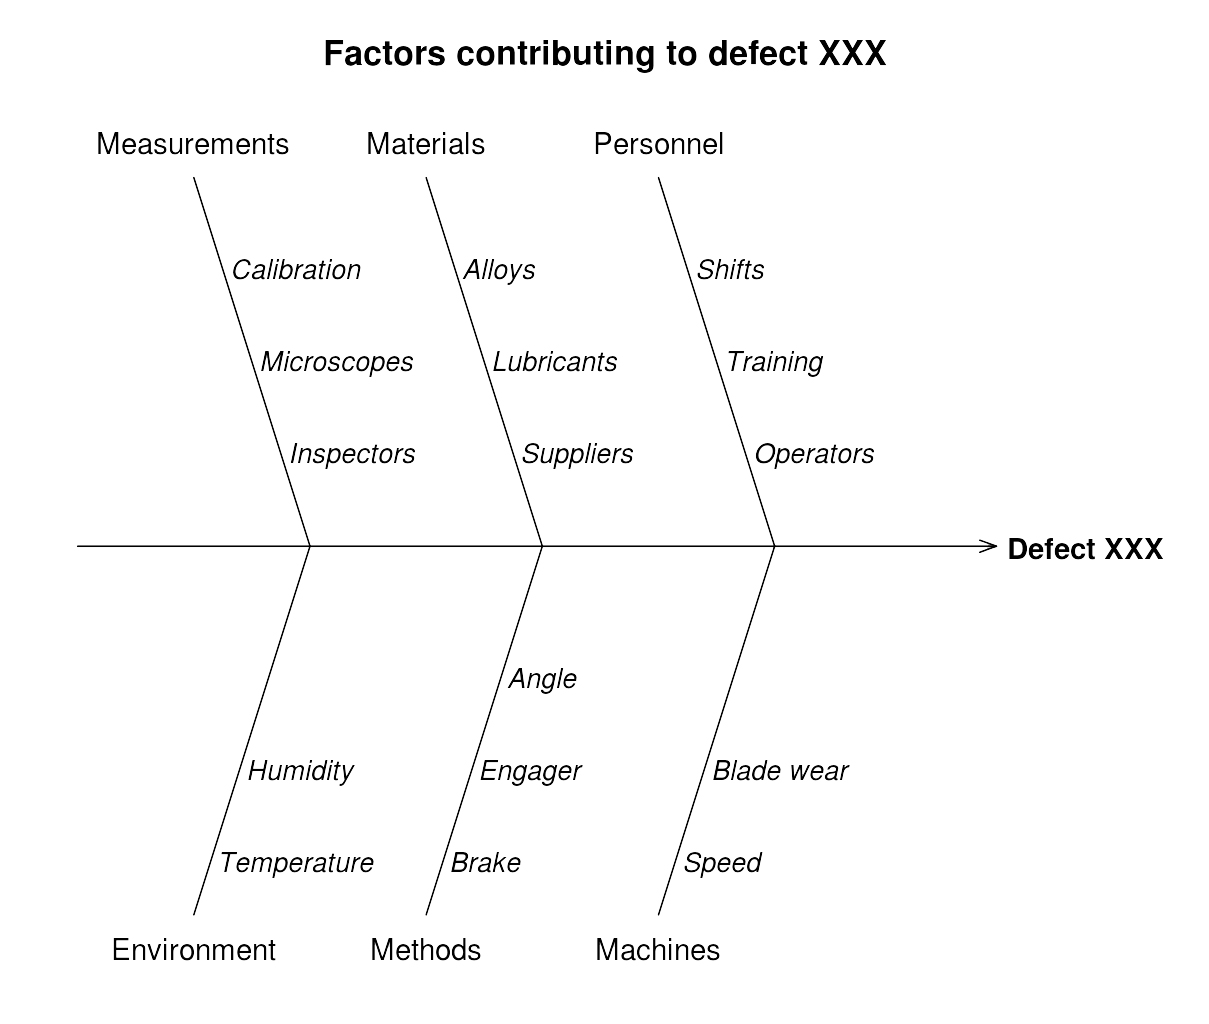 Ishikawa Diagram showing the factors that contribute to defect XXX. There is a horizontal arrow in the middle of the diagram pointing toward Defect XXX. There are three diagonal lines on either side of the arrow indicating factors. The first line includes the measurement factors, and has three subfactors: calibration, microscopes, and inspectors. The second line includes the materials factors, and has three subfactors: alloys, lubricants, and suppliers. The third line includes the personnel factors, and has three subfactors: shifts, training, and operators. The fourth line includes the environmental factors, and has two subfactors: humidity and temperature. The fifth line includes the methods factors, and has three subfactors: angle, engager, and brake. The sixth line includes the machine factors, and has two subfactors: blade wear and speed.